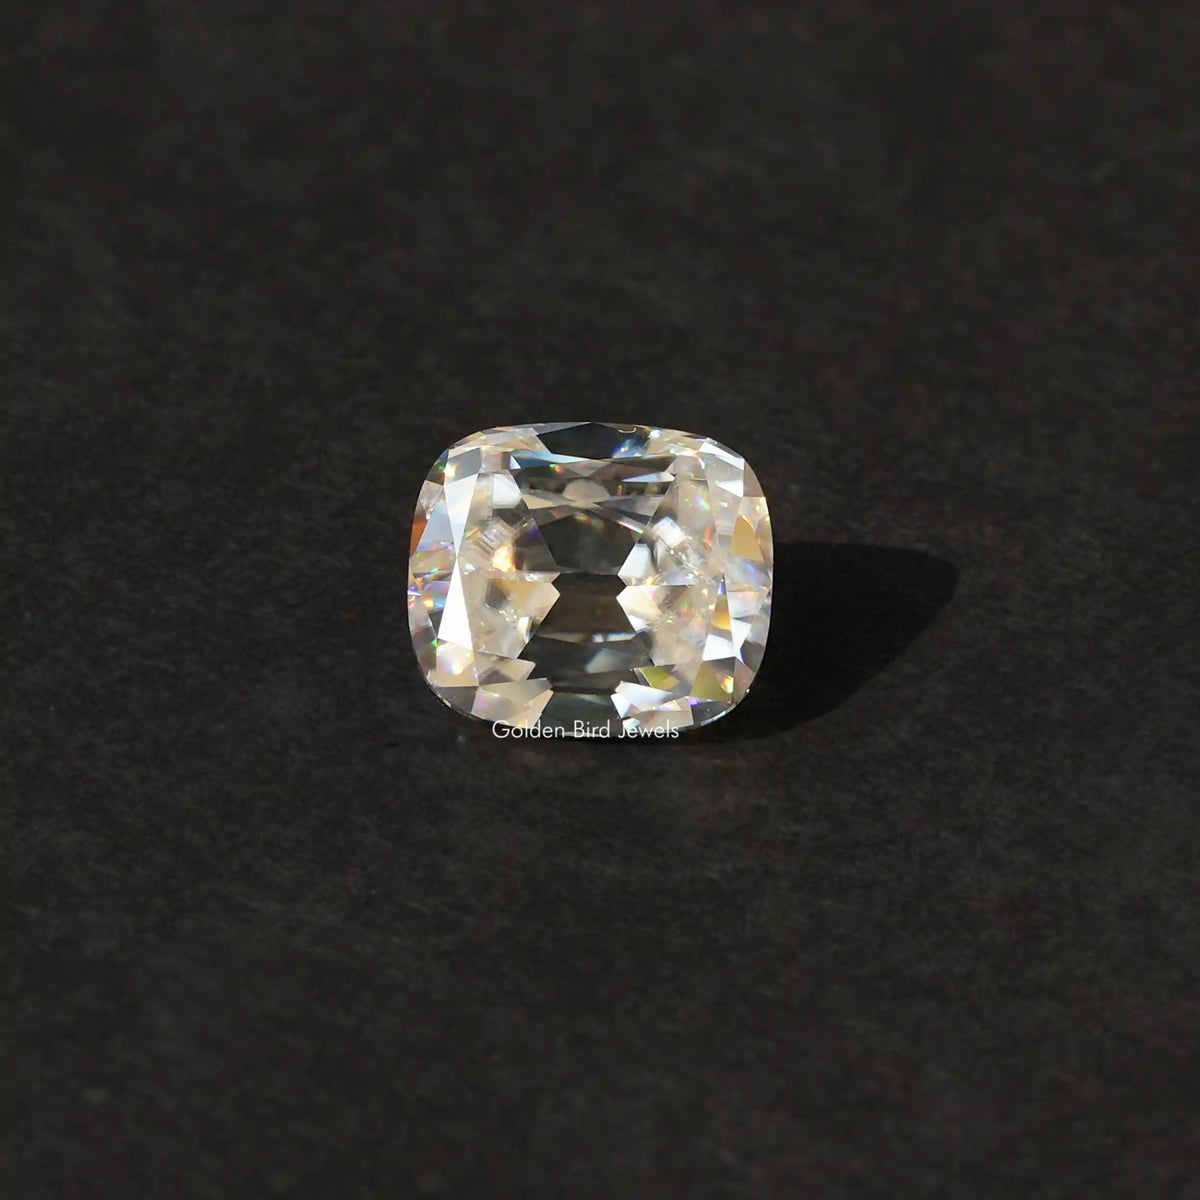 [Front view of moissanite cushion cut loose stone]-[Golden Bird Jewels]